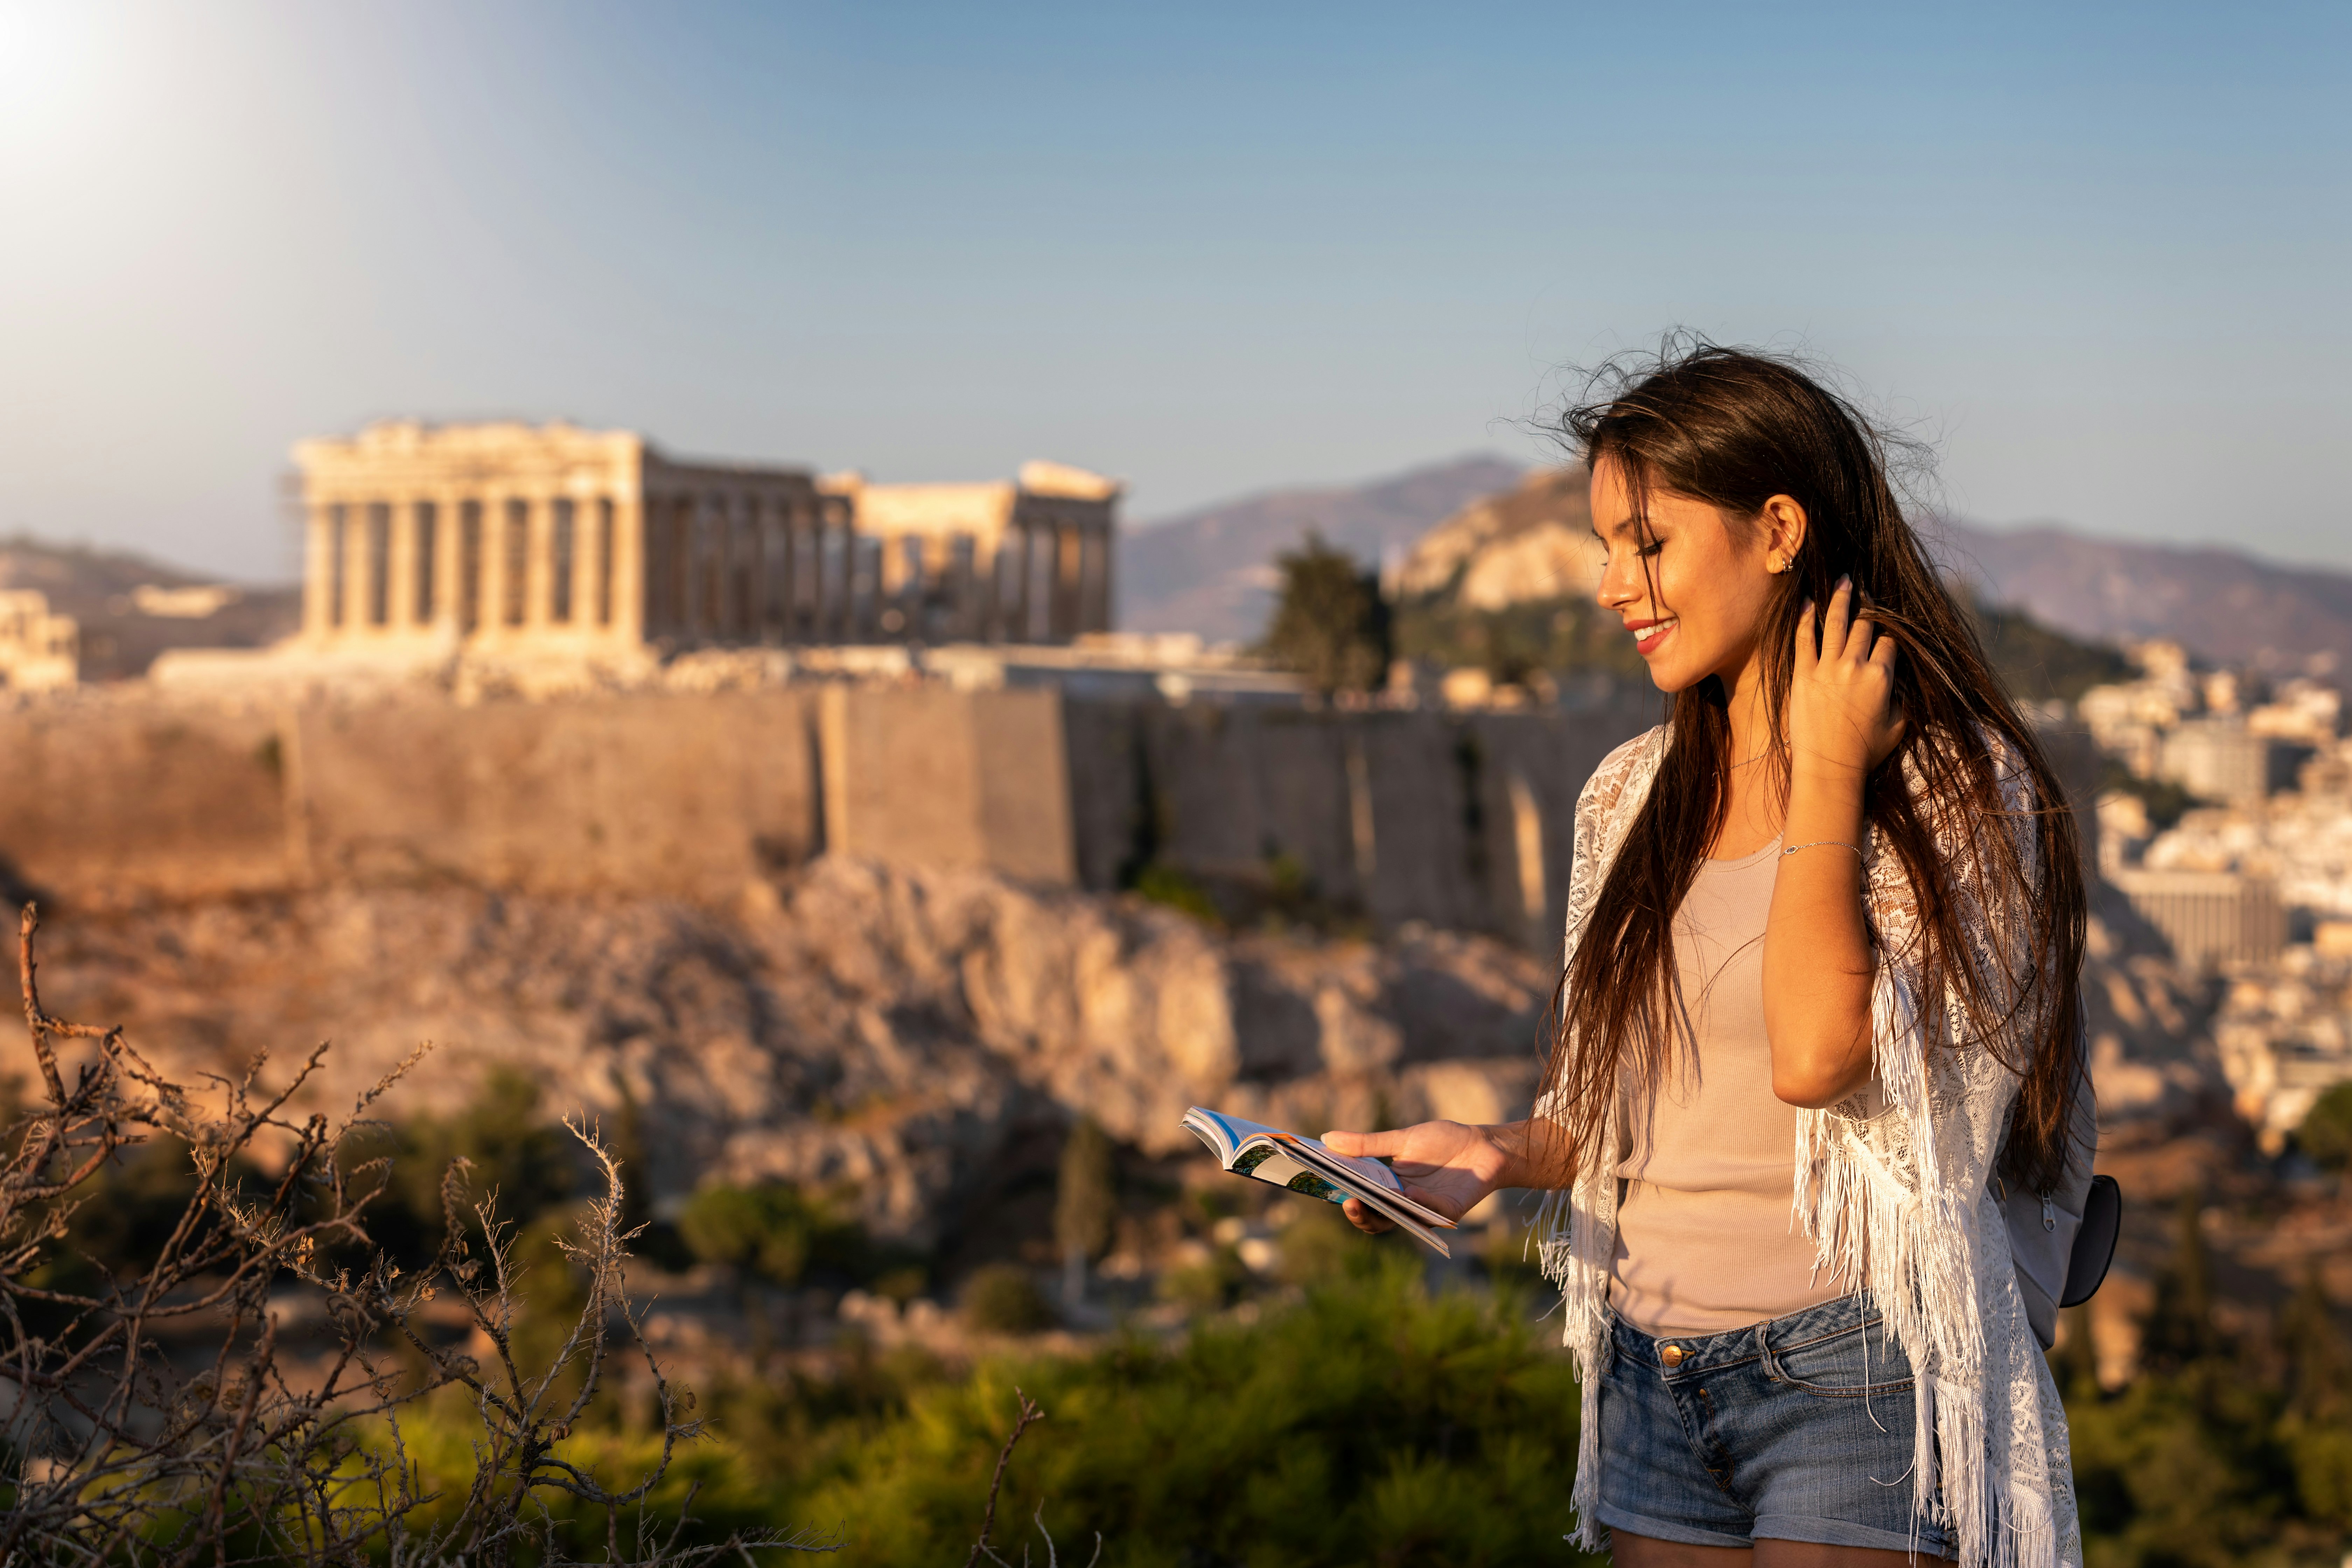 A woman with guidebook acropolis standing outside reading guidebook with the Acropolis in the background